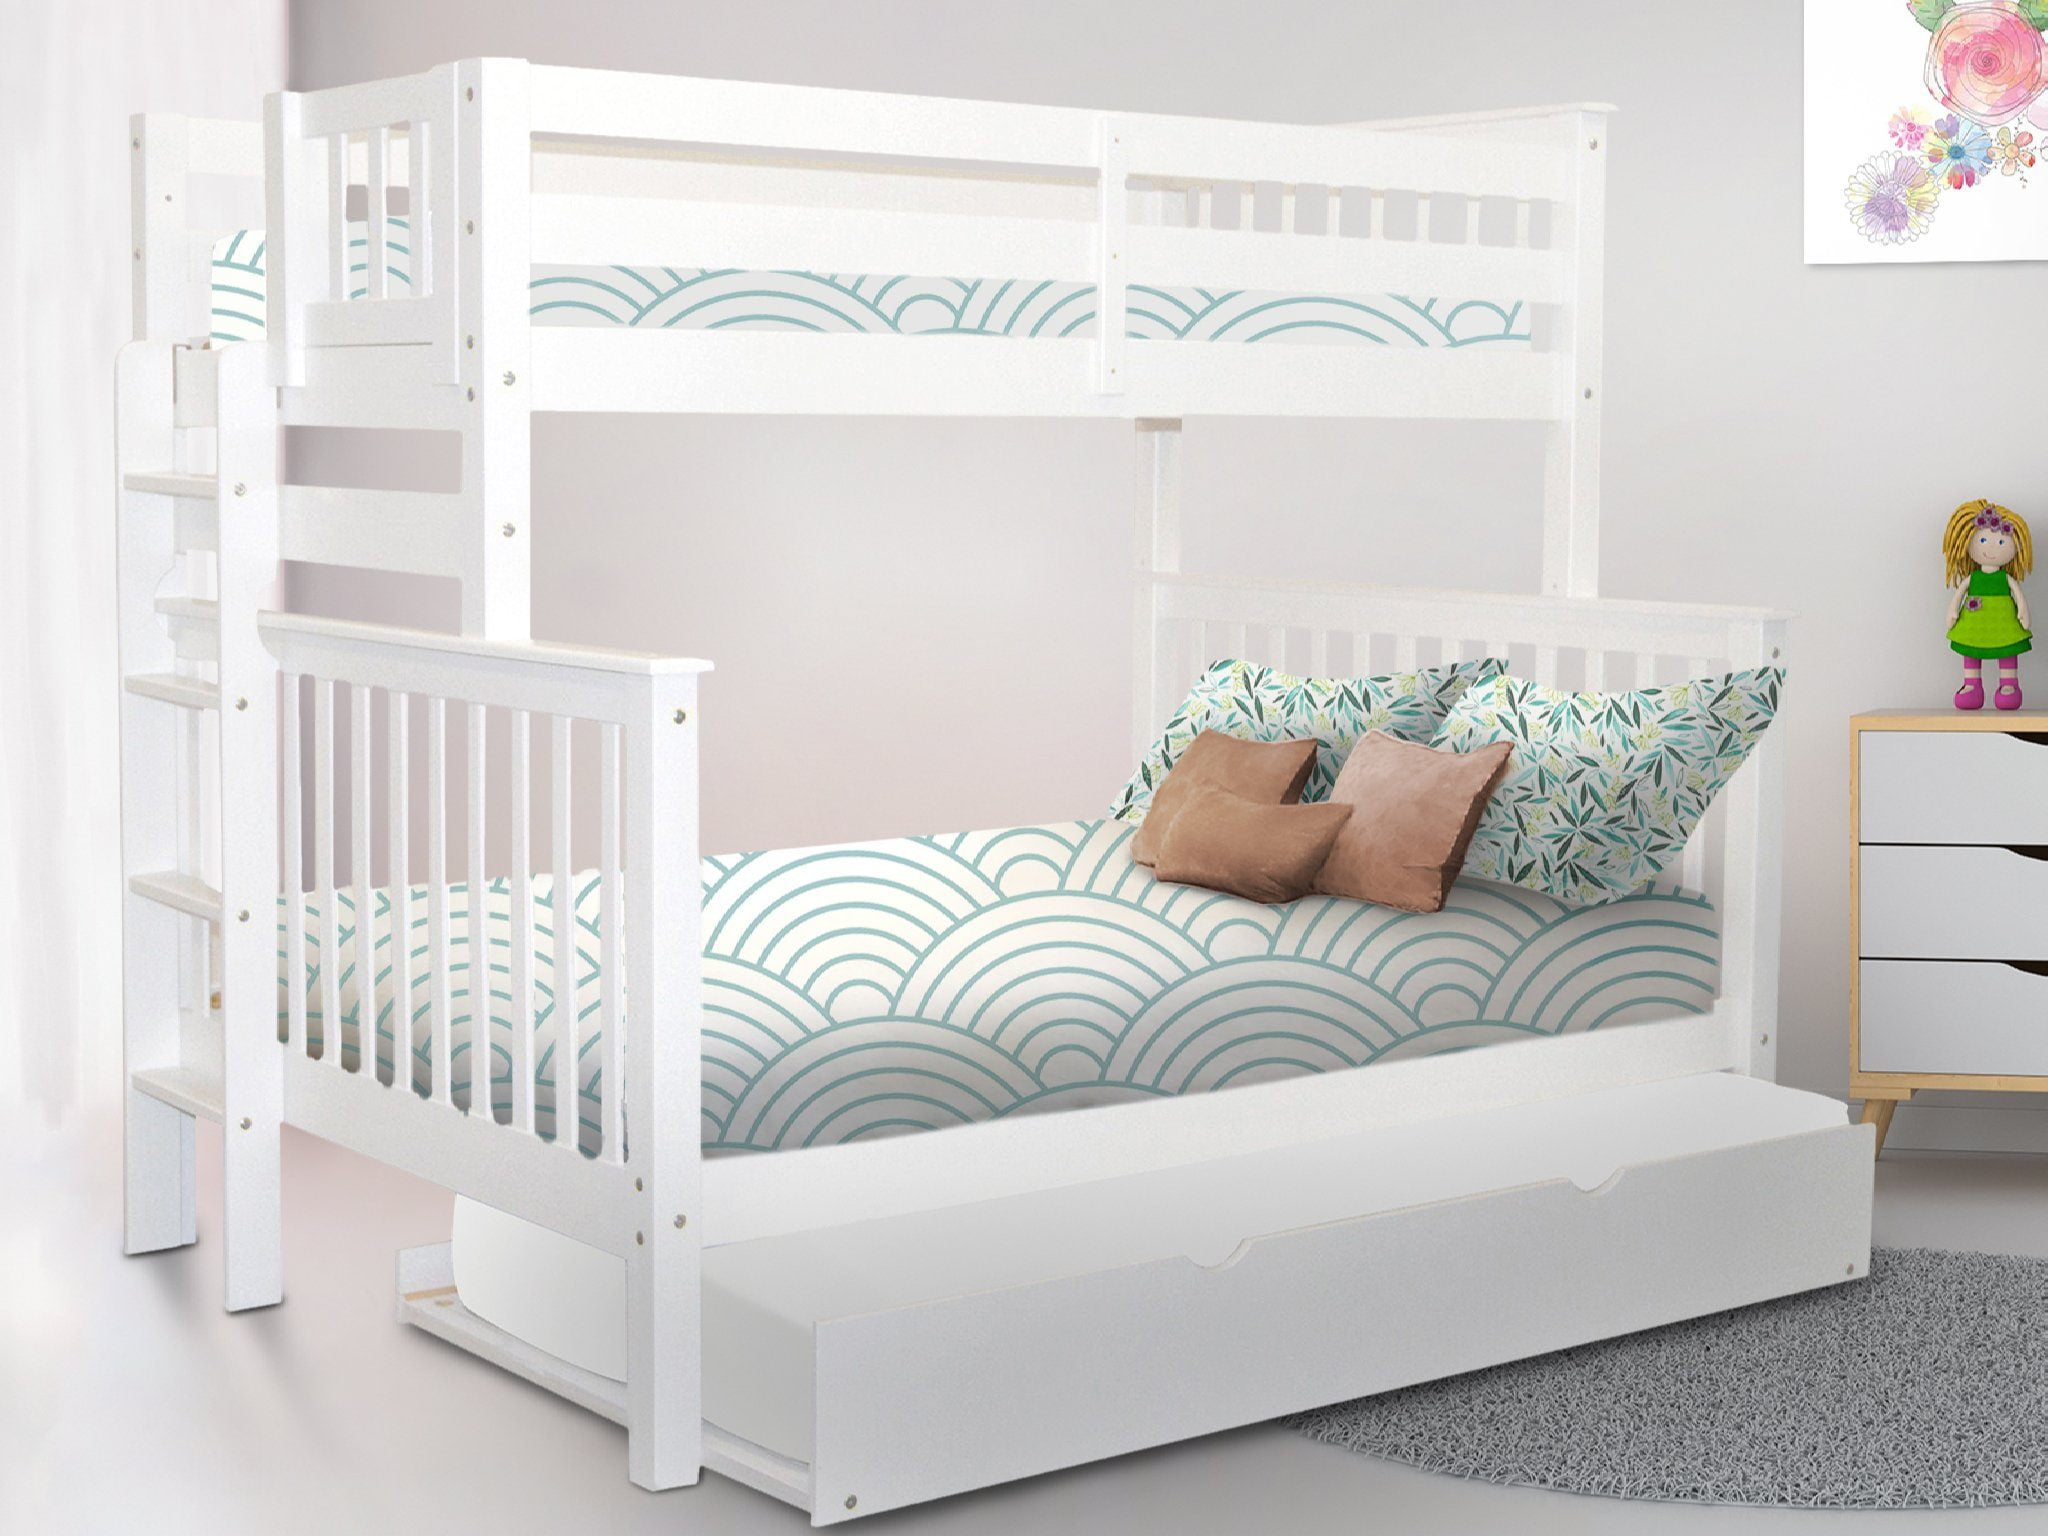 Bunk Beds Twin Over Full Mission Style, Slumberland Bunk Beds